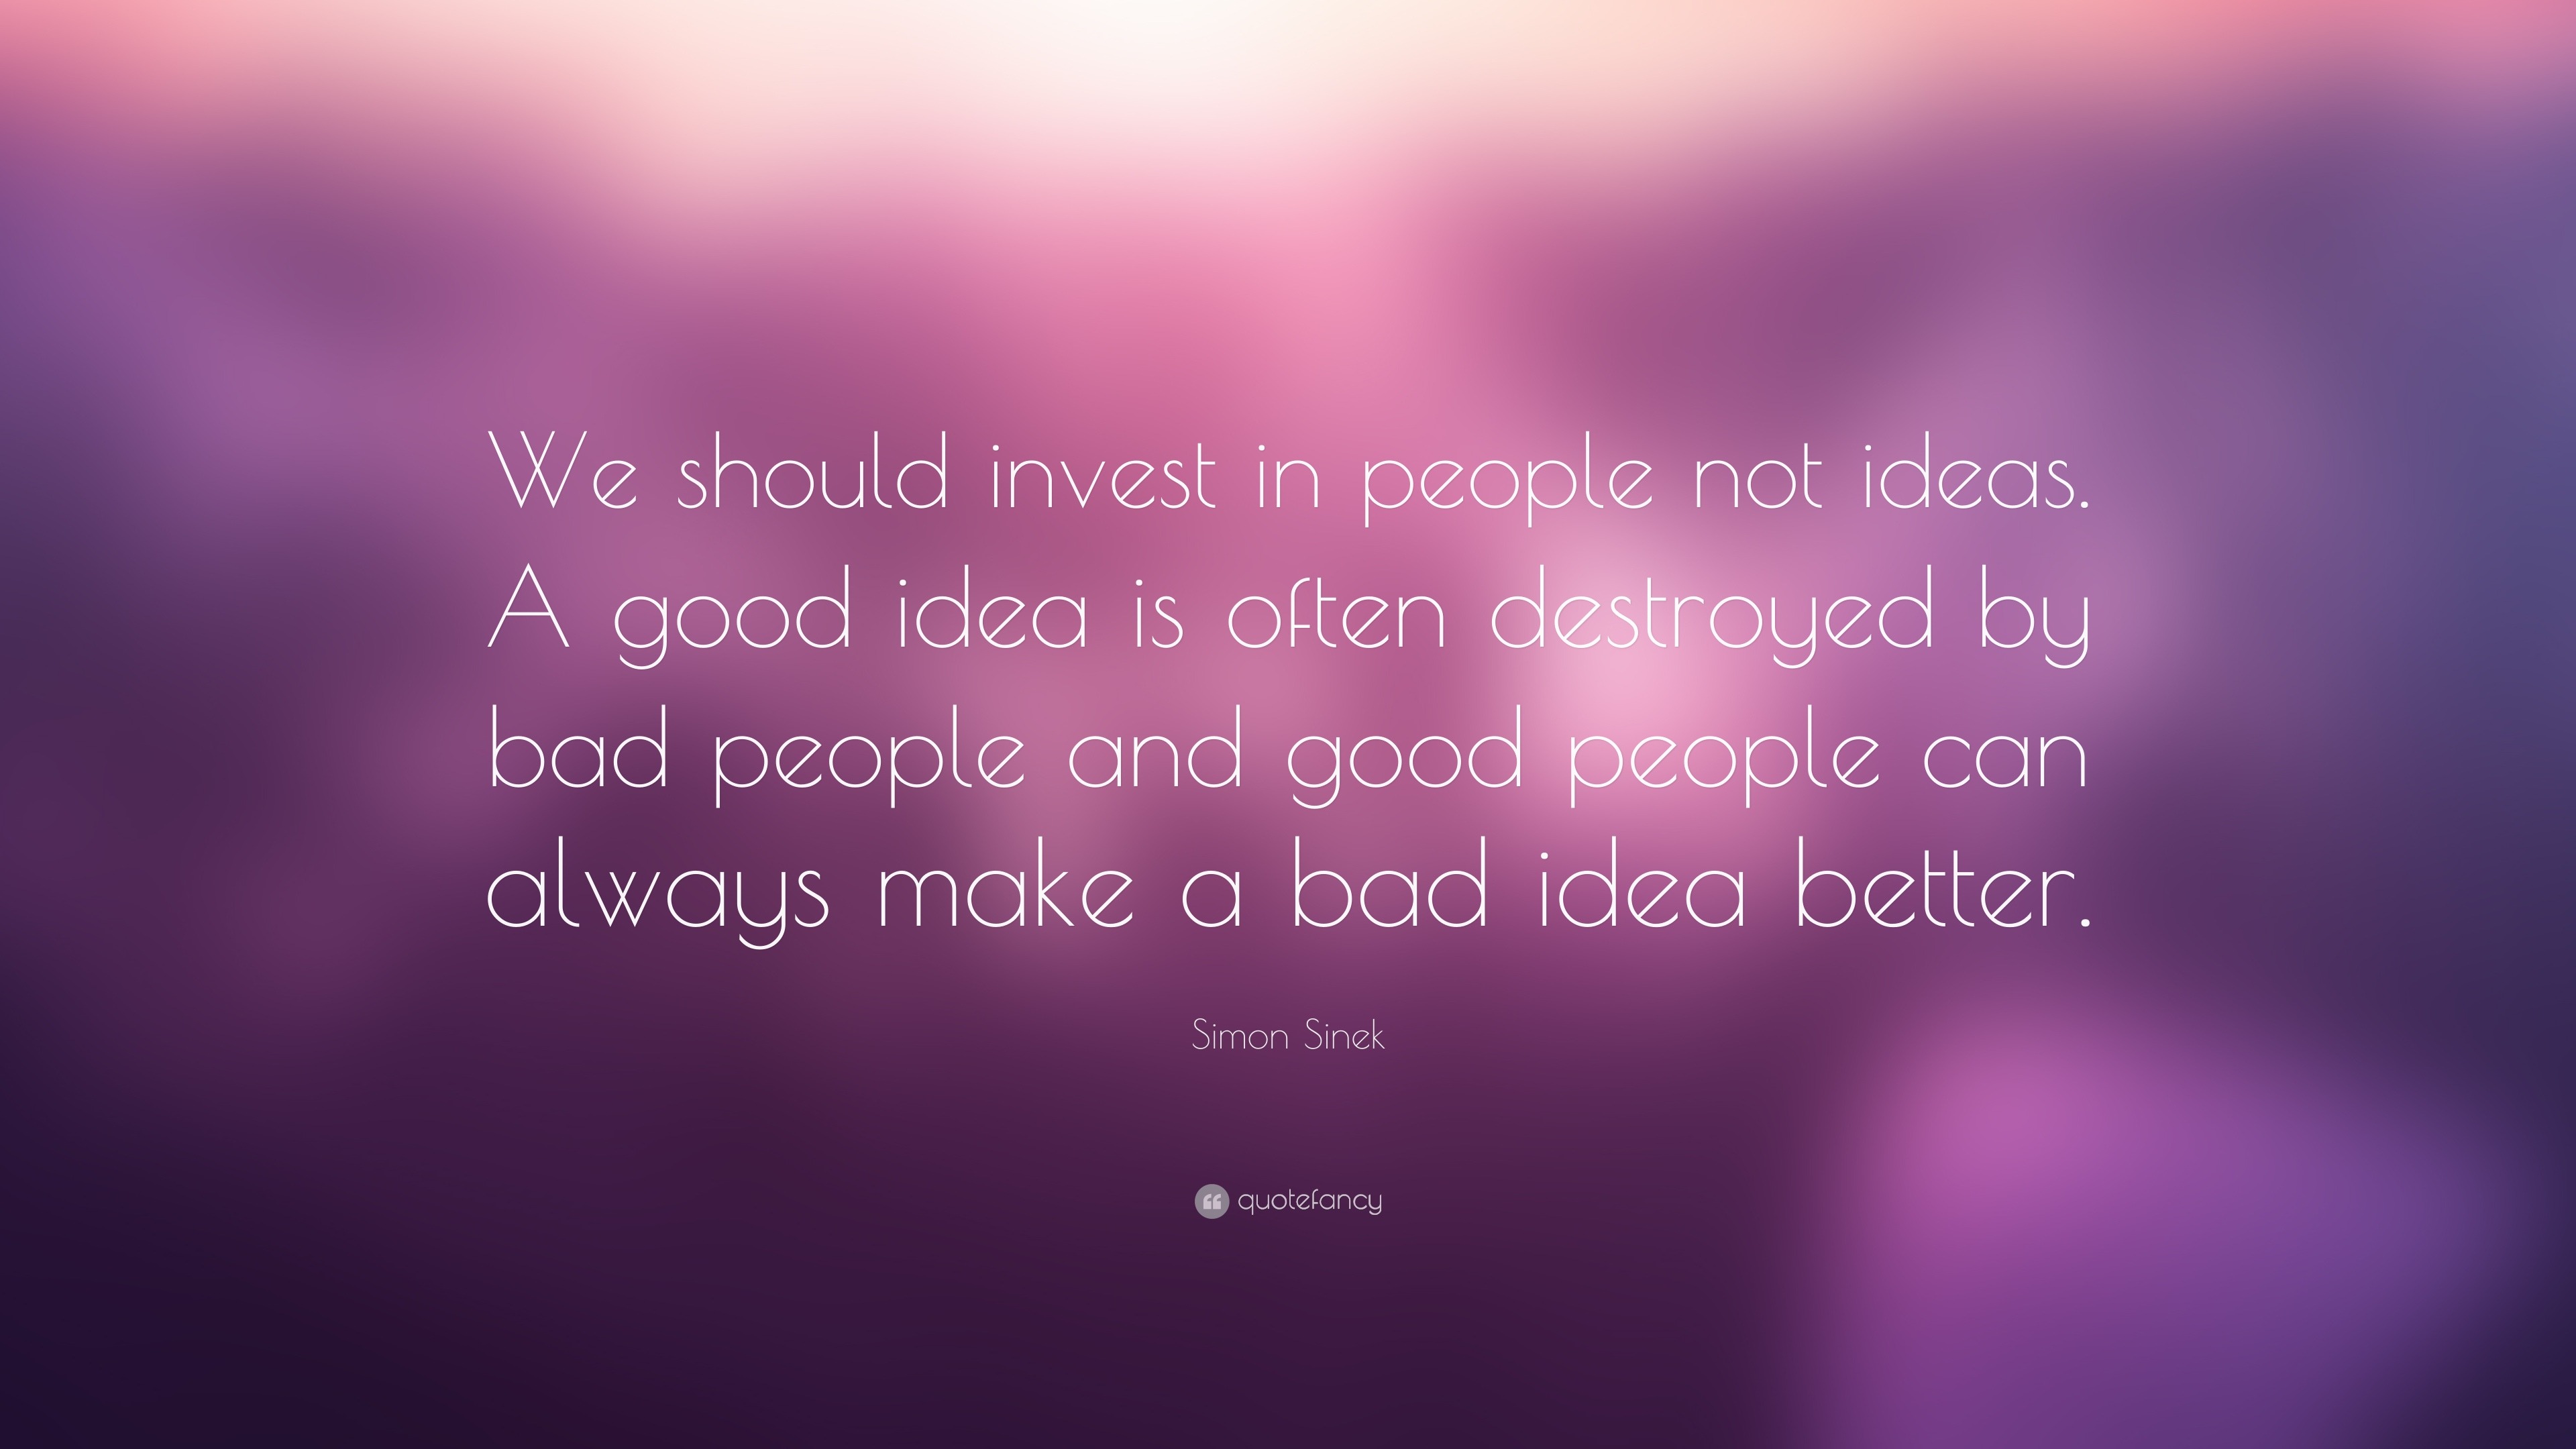 Simon Sinek Quote “We should invest in people not ideas